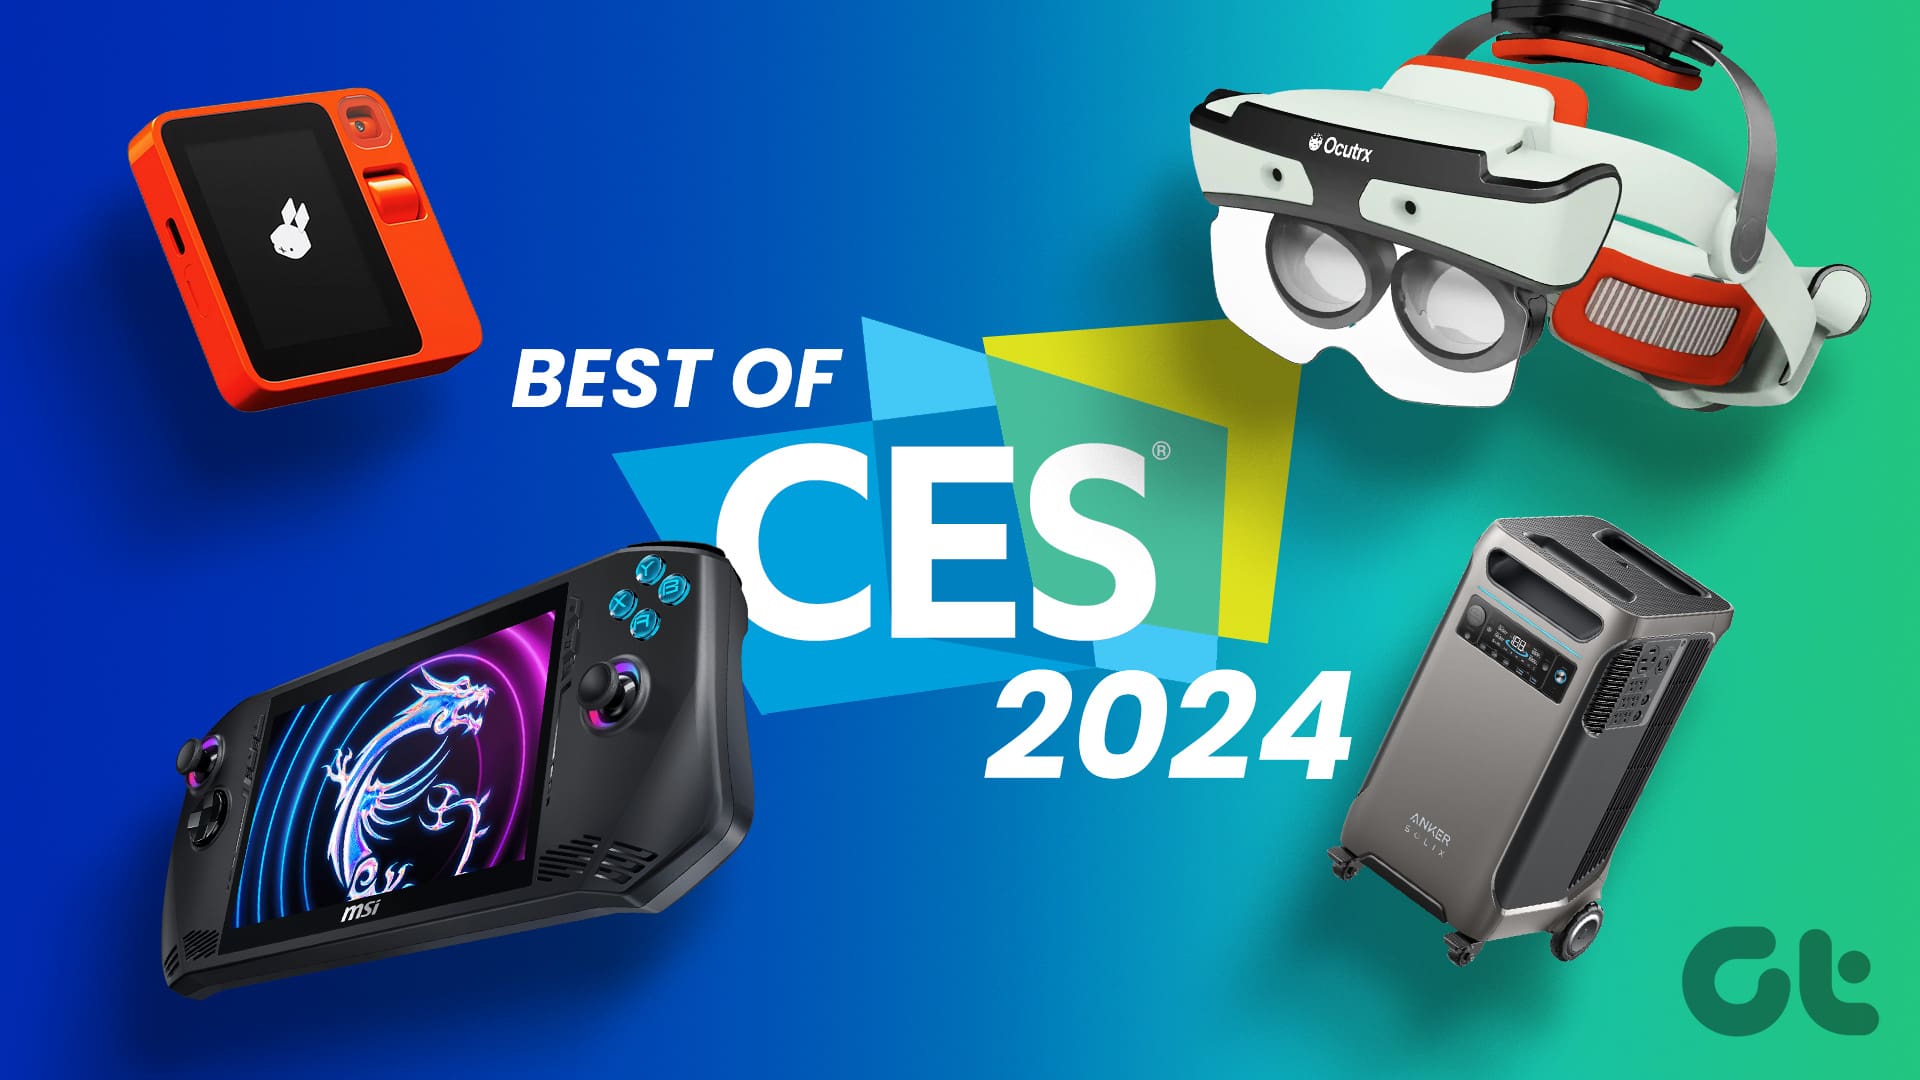 You are currently viewing CES 2024 요약: CES 2024 최고의 기술